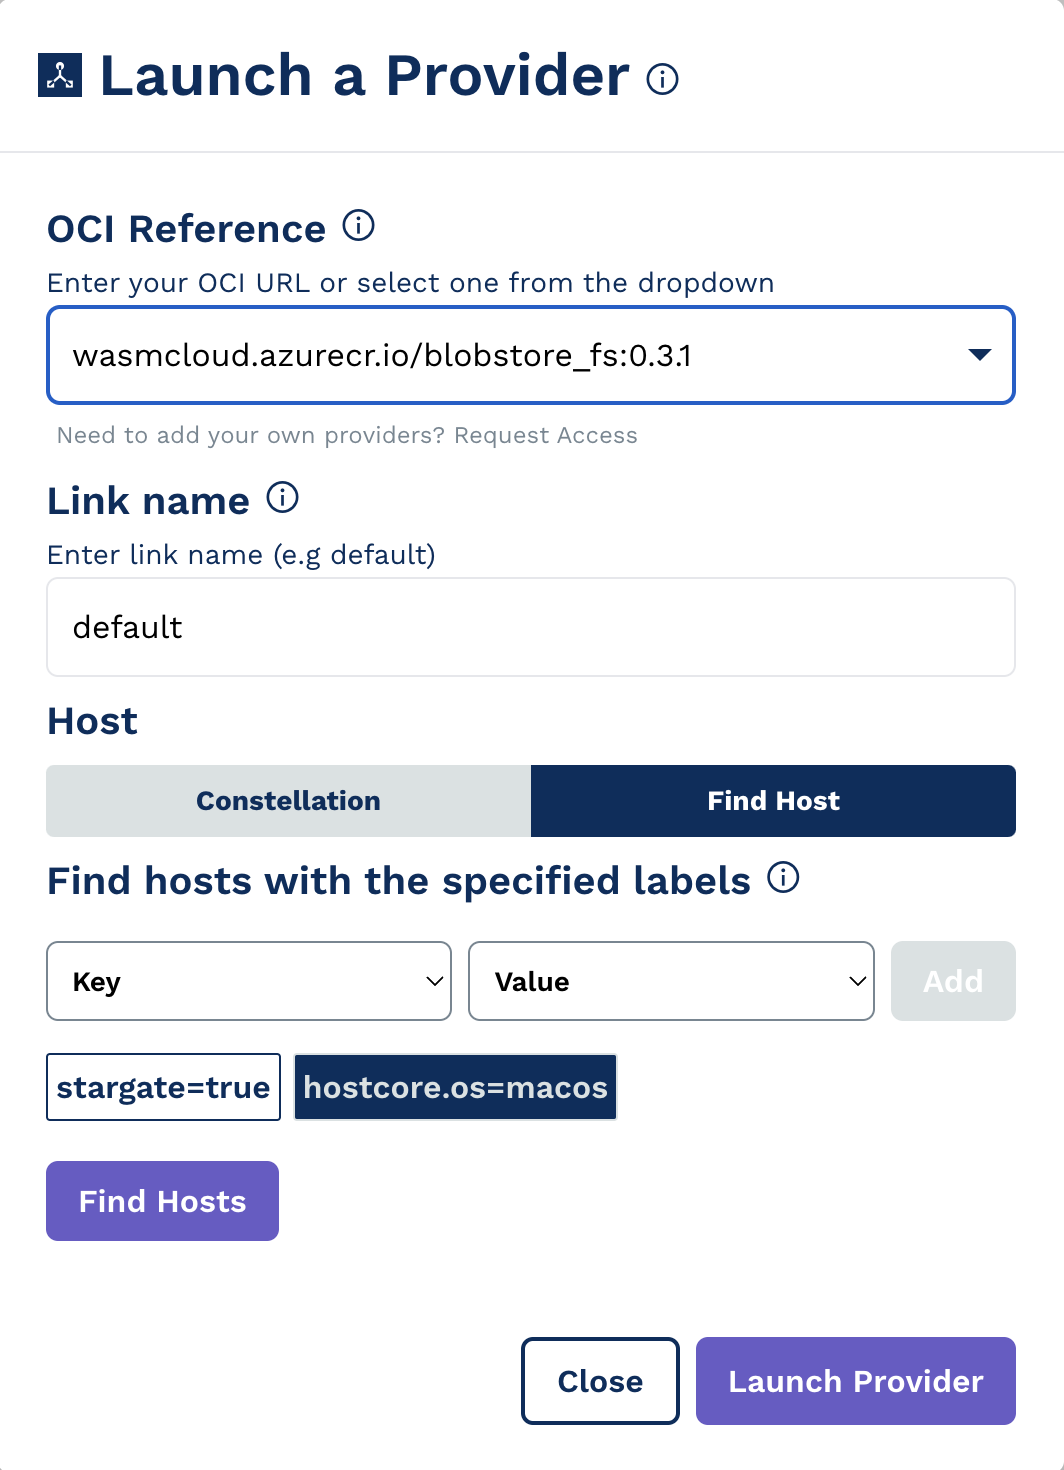 Using Labels to query for a specific host